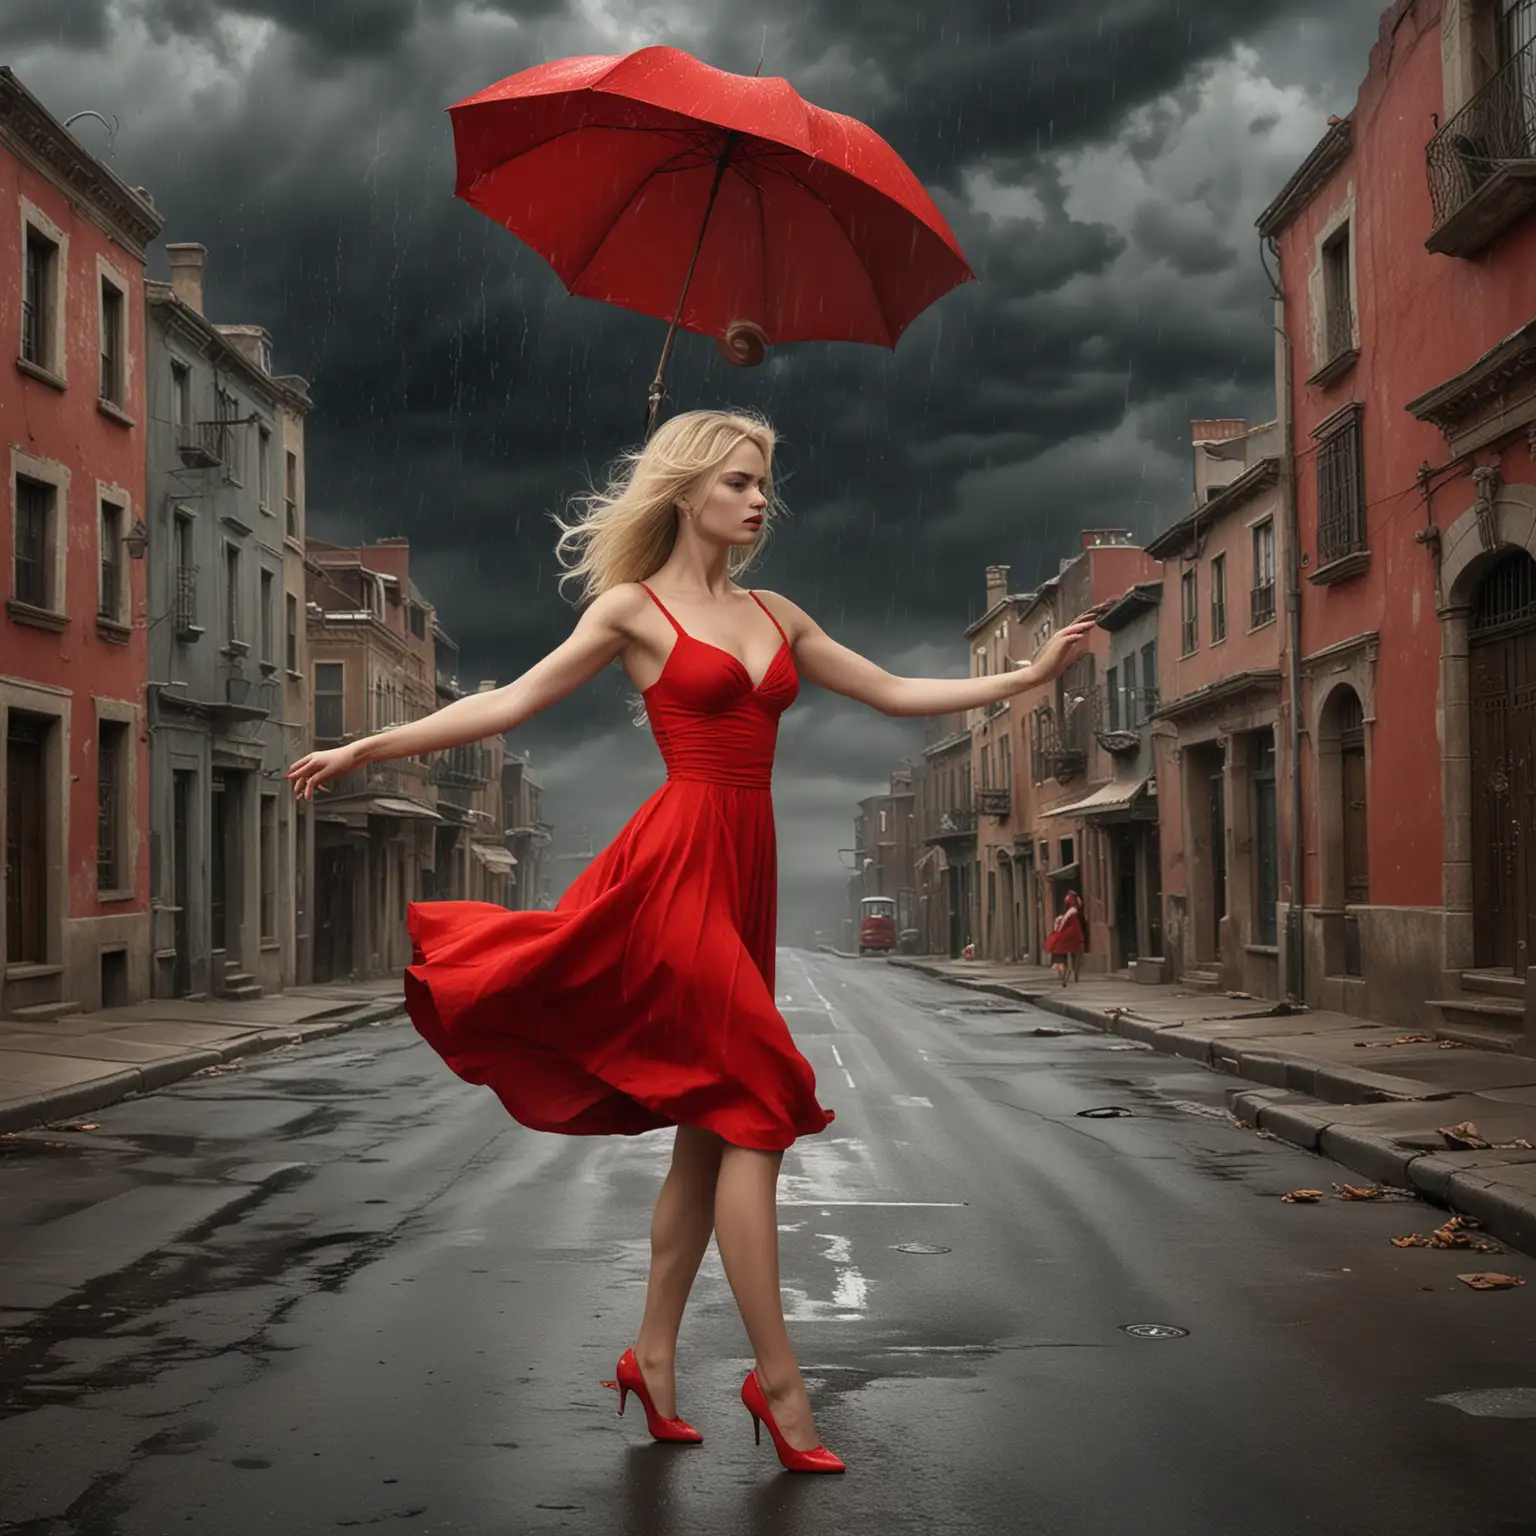 Blonde Woman Dancing in Red Dress Surreal Street Scene with Approaching Storm